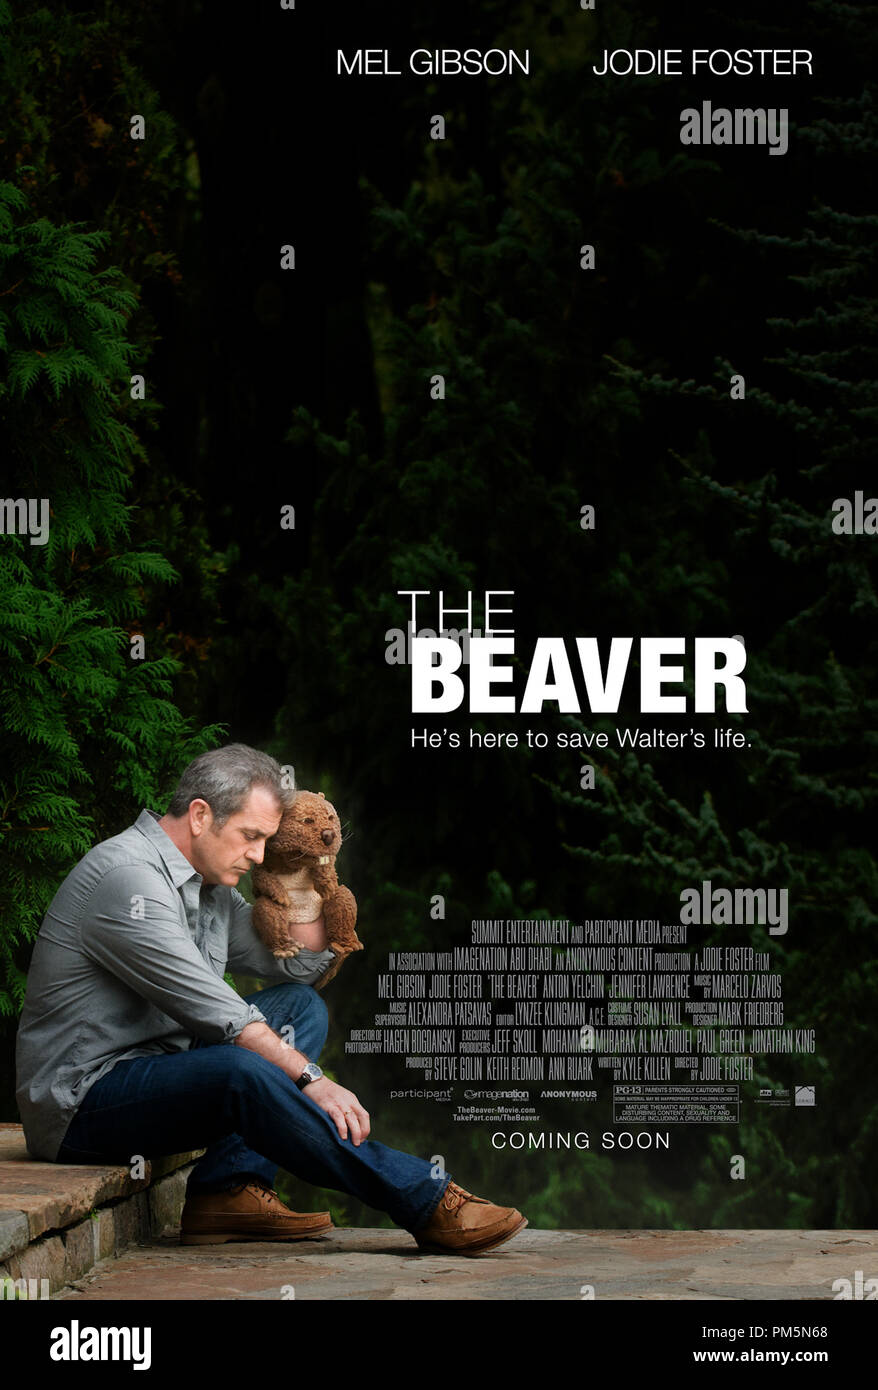 THE BEAVER with star MEL GIBSON, Poster. Stock Photo